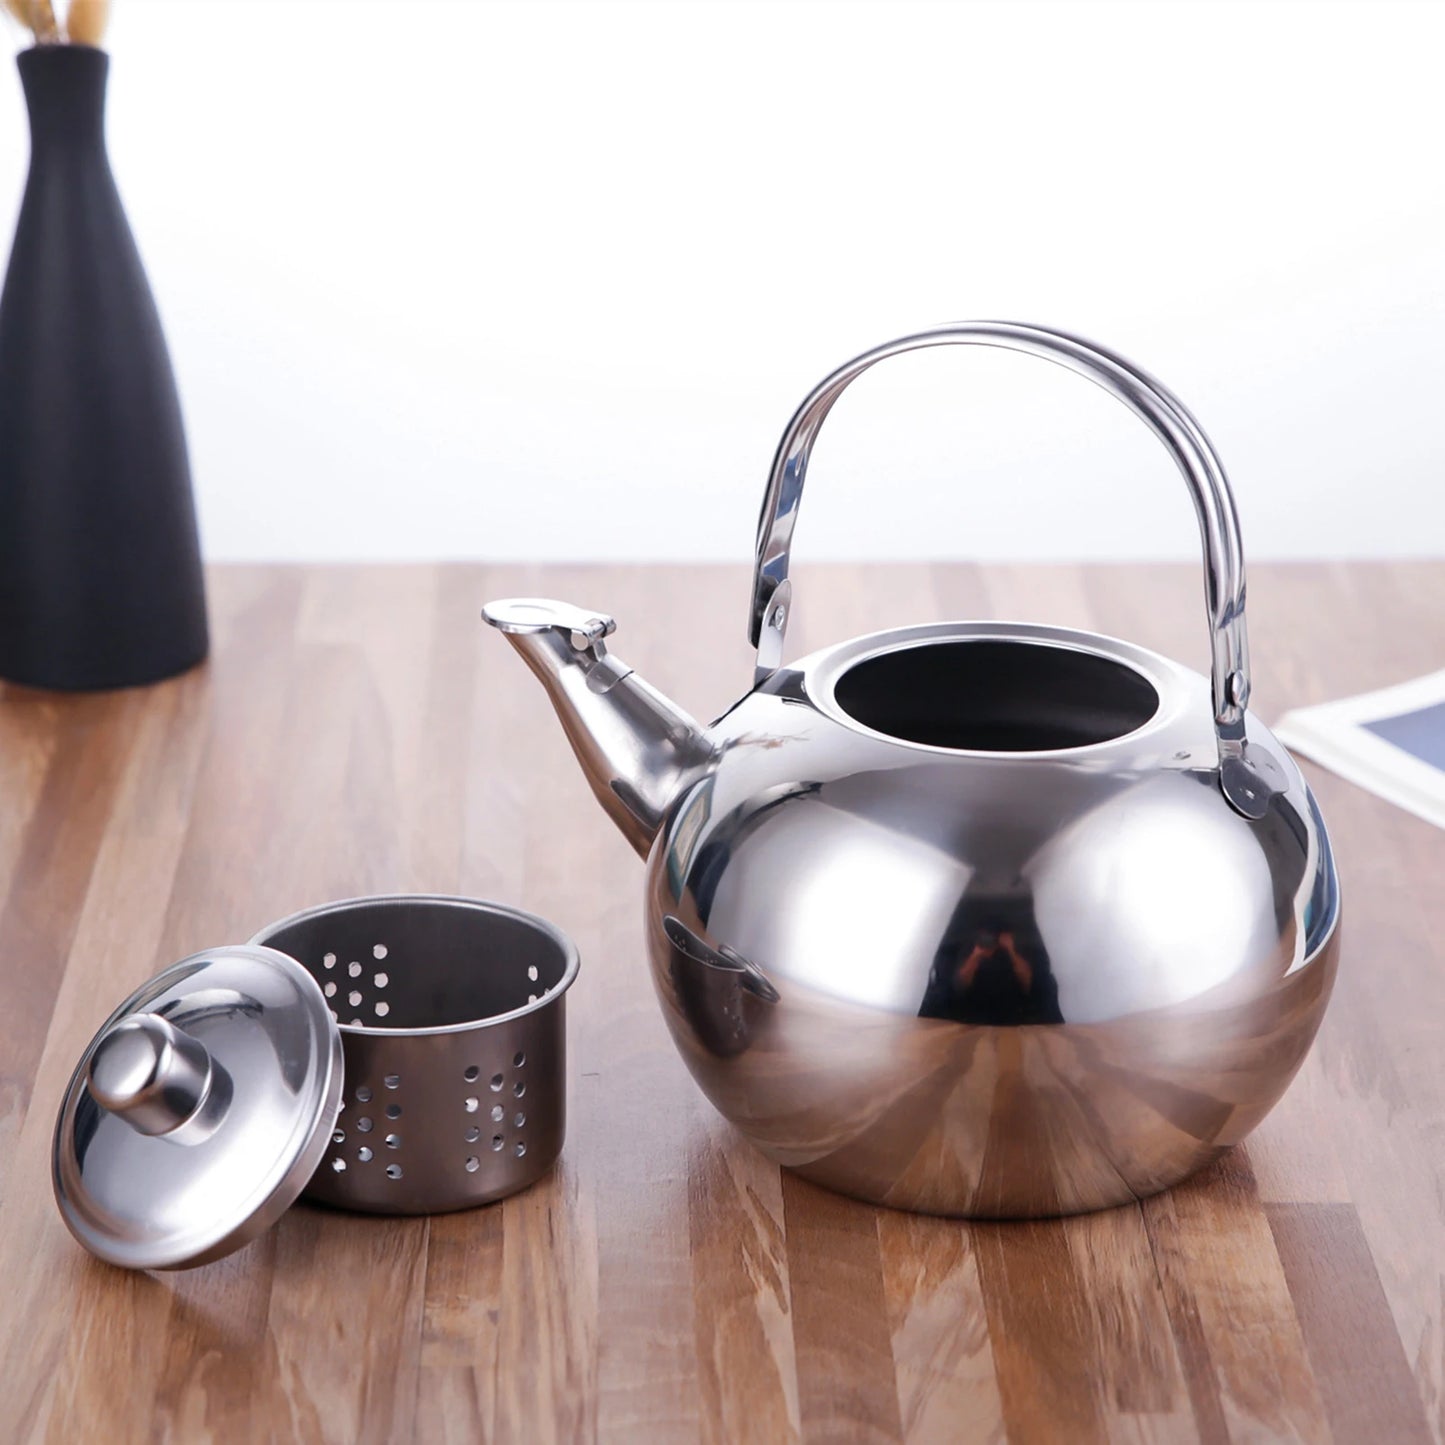 Stainless steel teapot and pot for boiling water